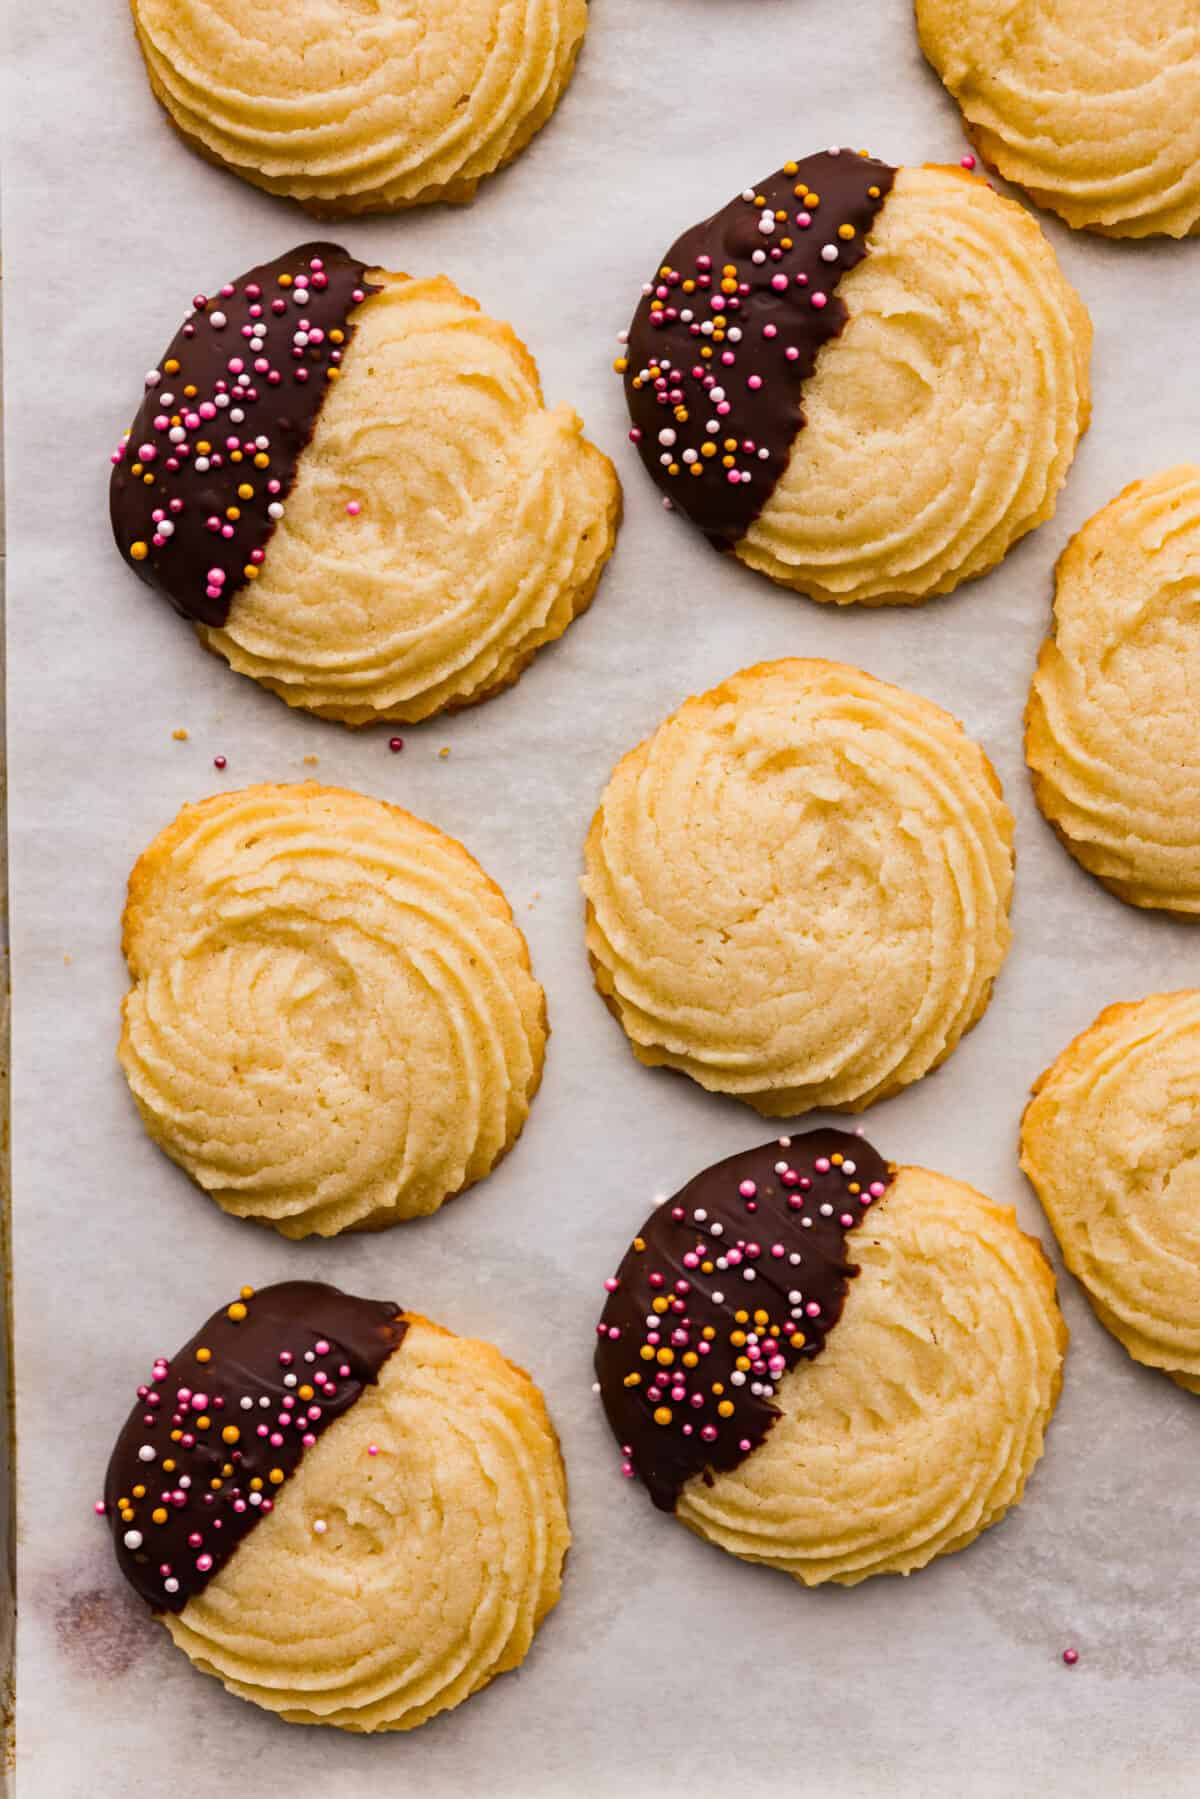 Top close view of butter cookies on a baking sheet pan. Some are plain, some are dipped with sprinkles. 